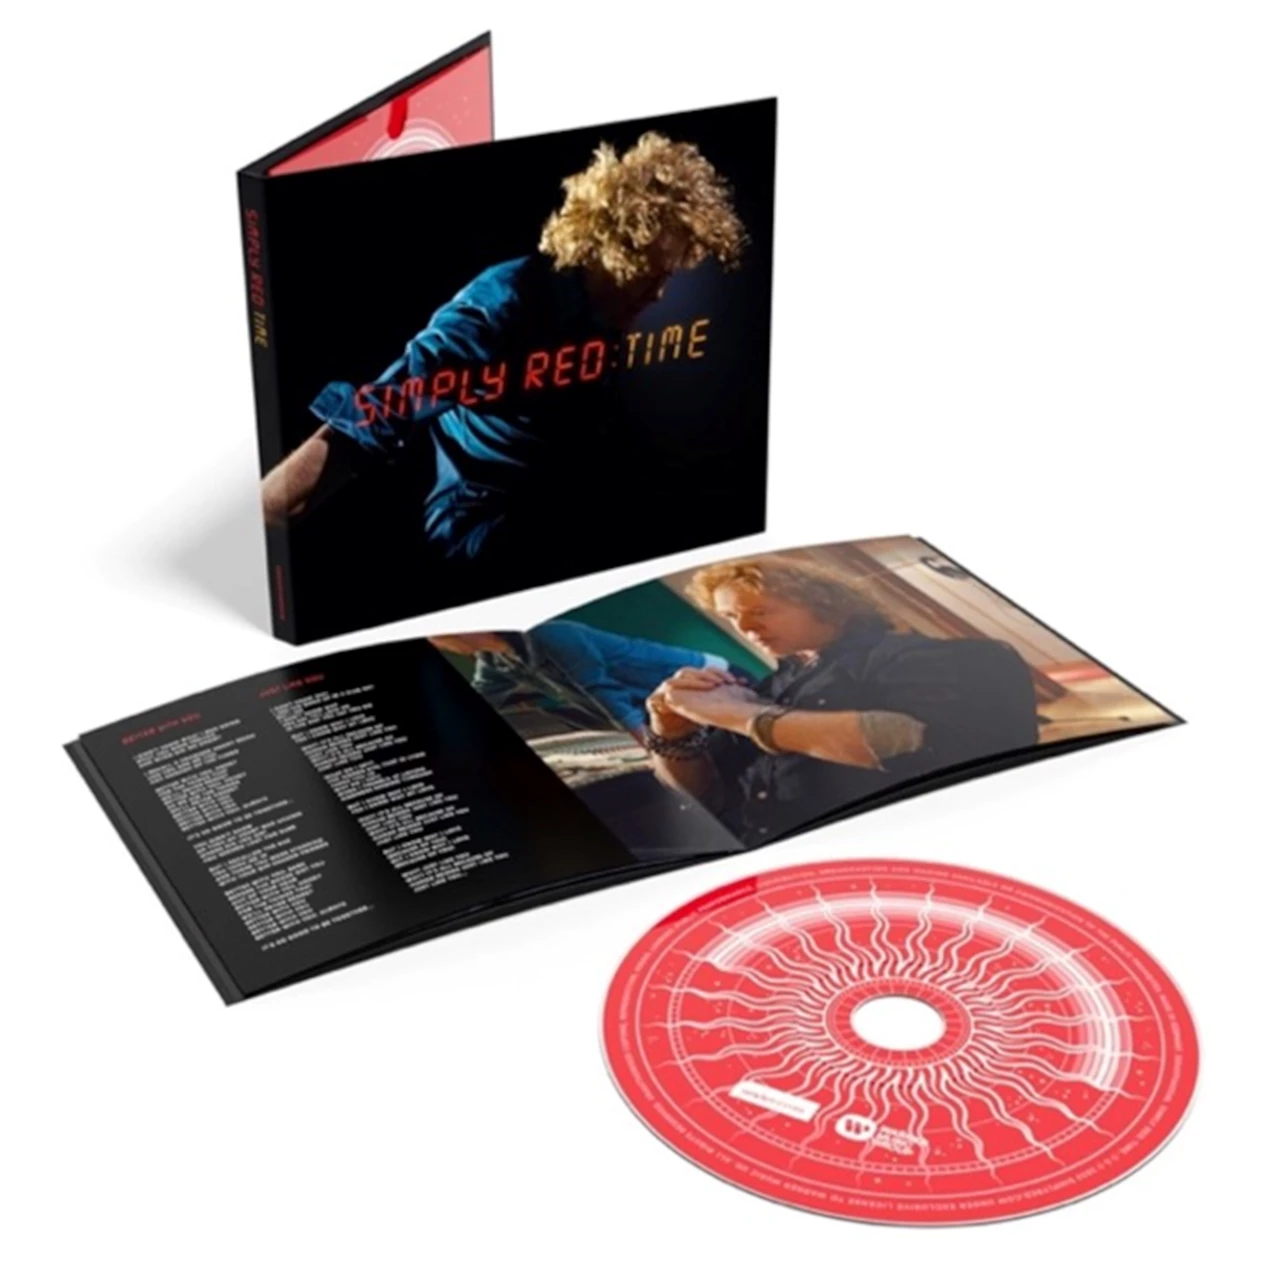 Time (deluxe edition) (pre-order due 26 may)